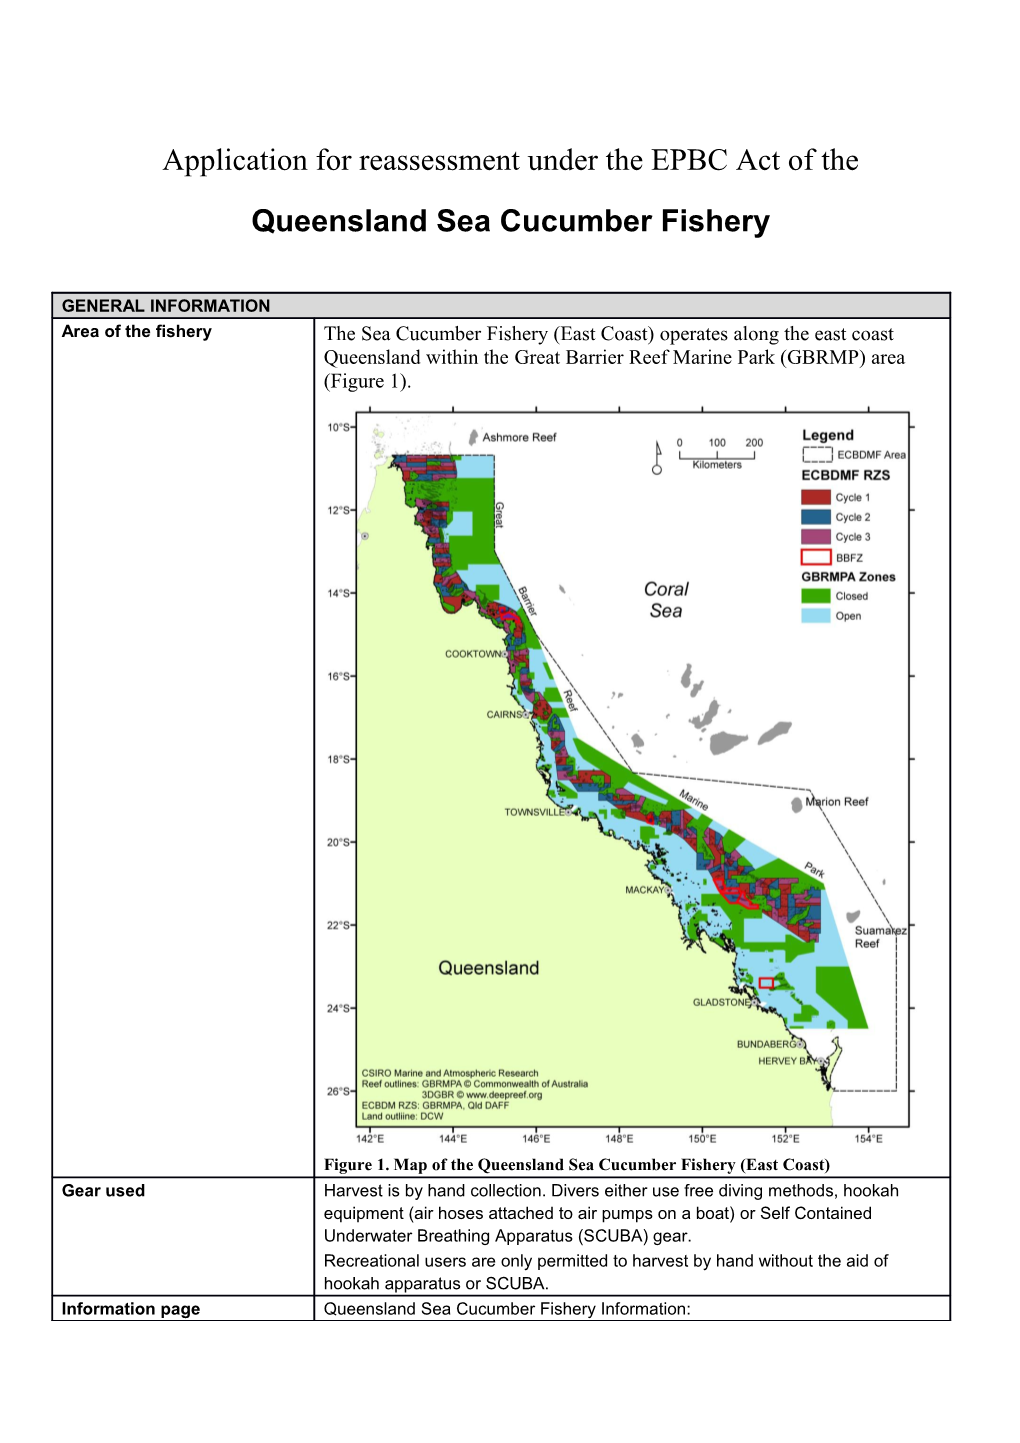 Application for Reassessment Under the EPBC Act of the Queensland Sea Cucumber Fishery